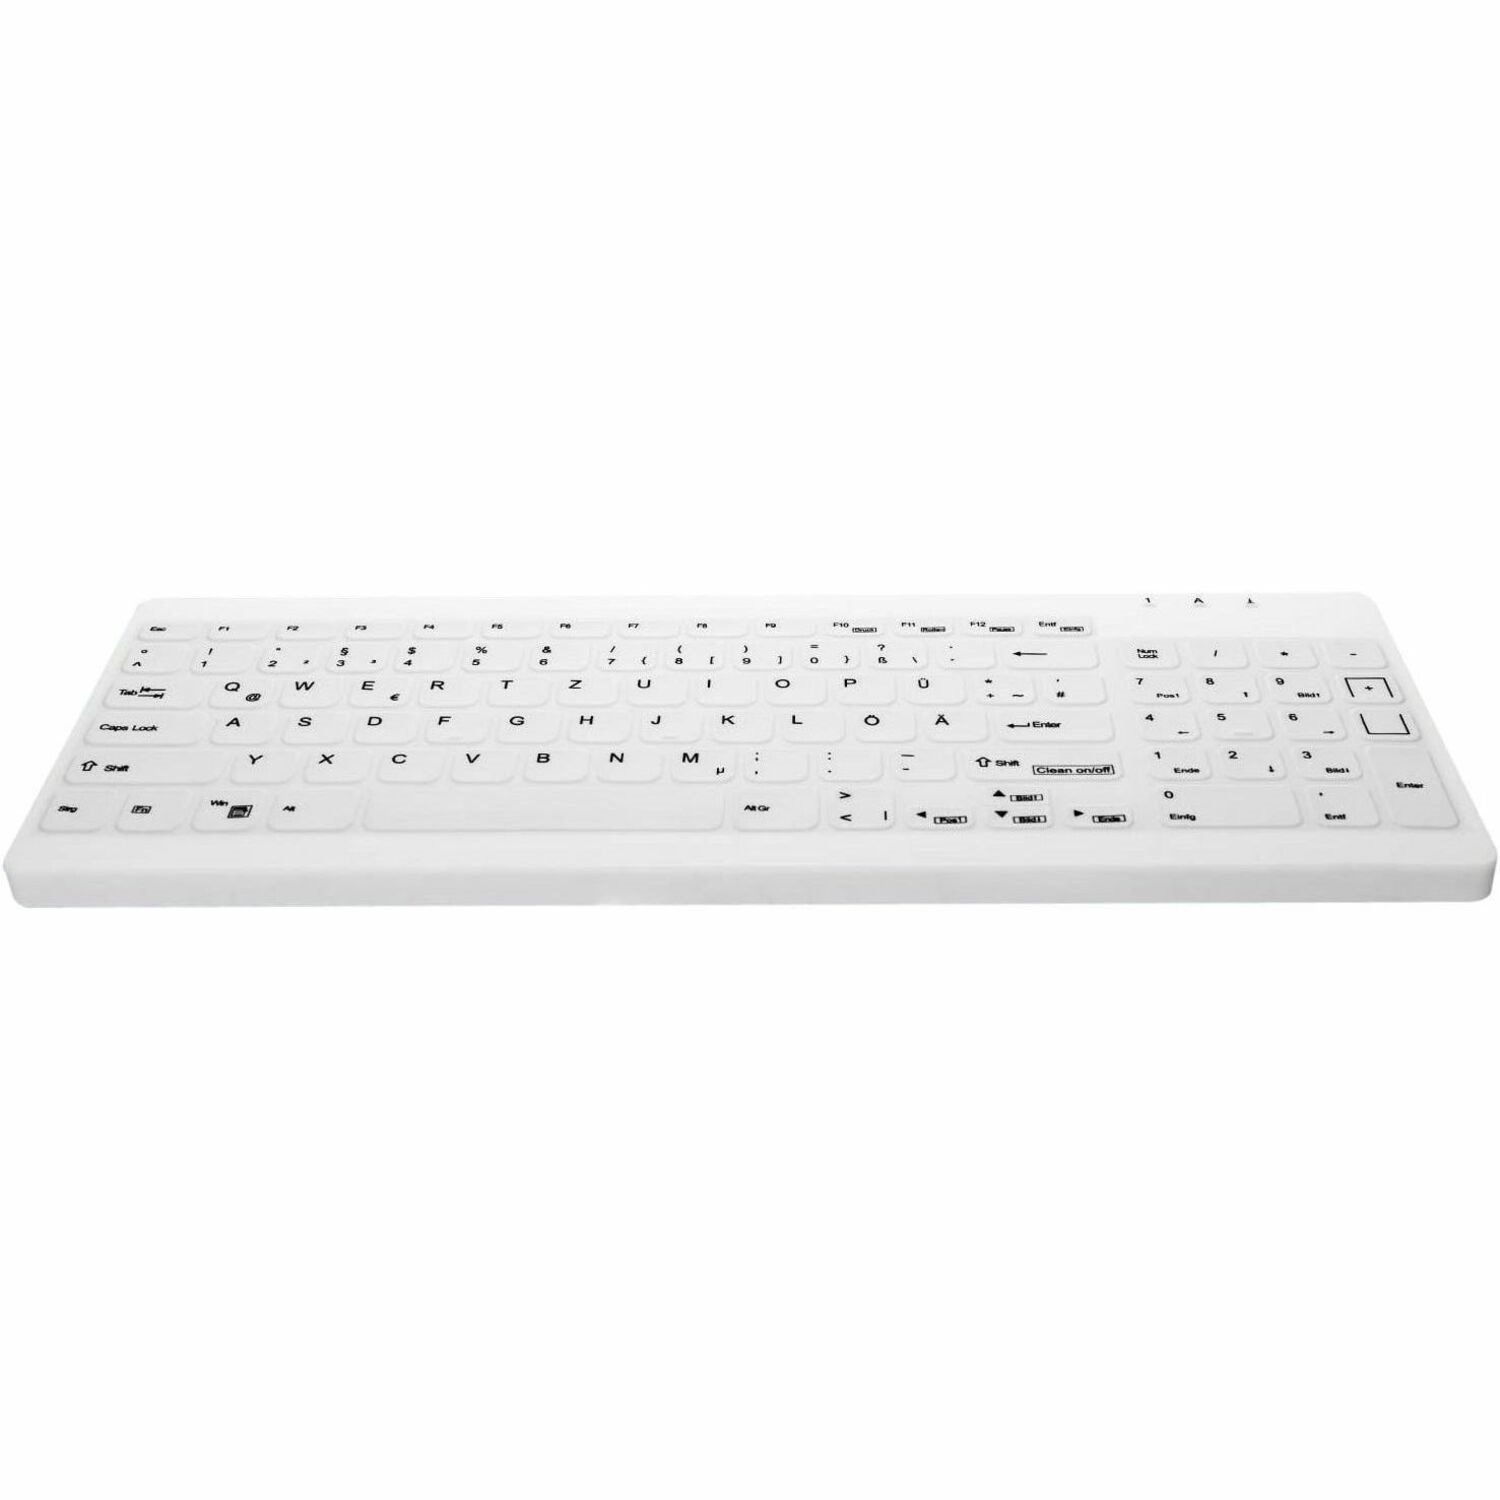 Active Key Keyboard - Cable Connectivity - USB 1.1 Type A Interface - French - White